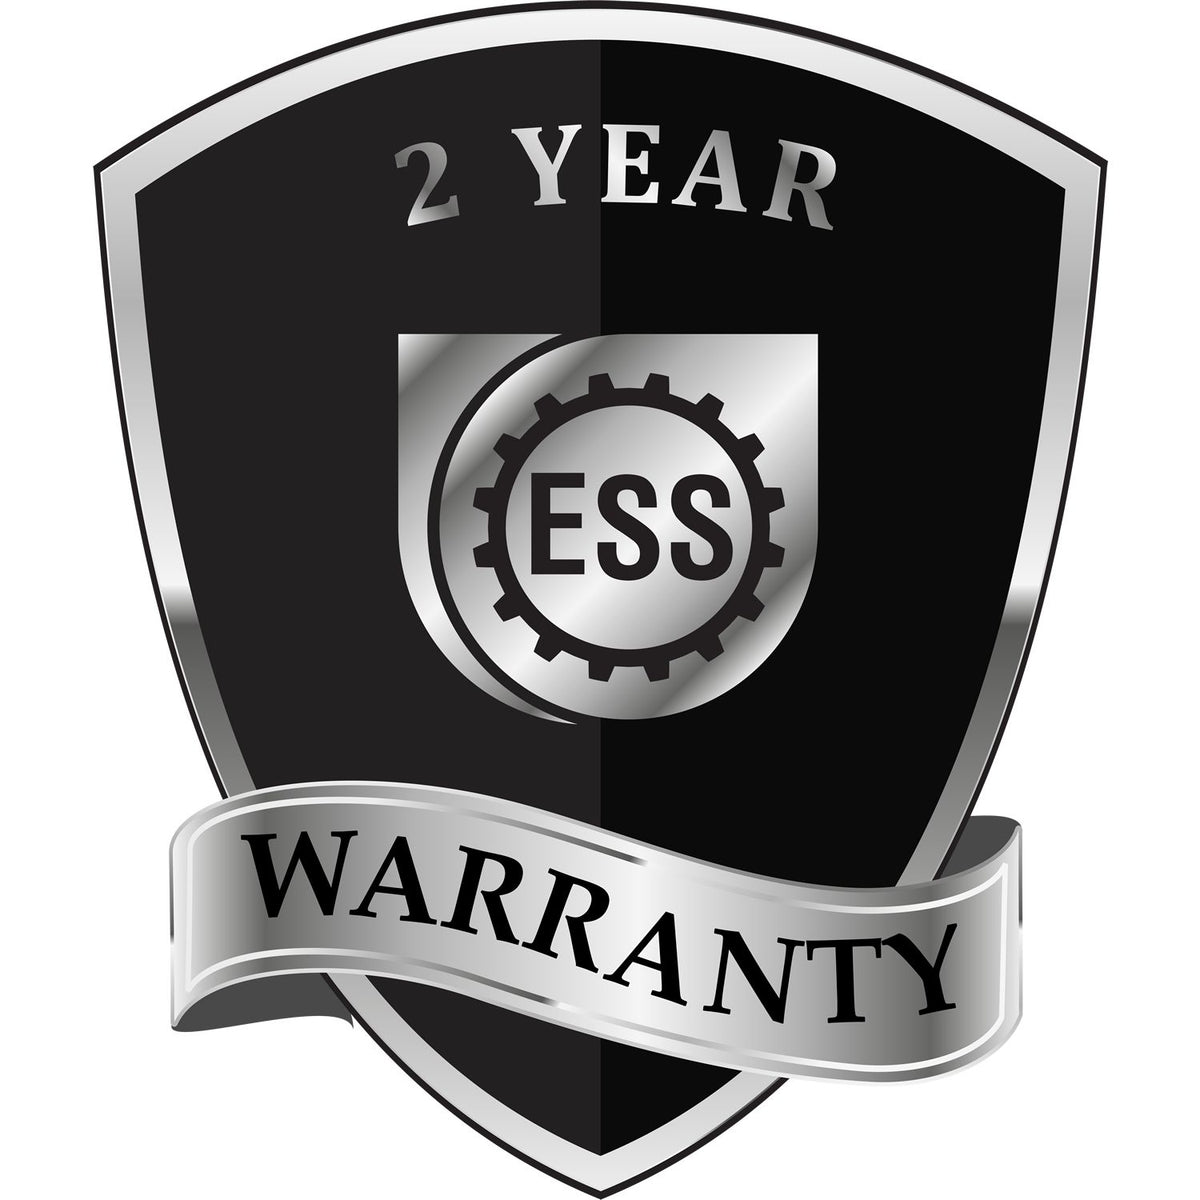 A badge or emblem showing a warranty icon for the Soft Pocket Louisiana Landscape Architect Embosser